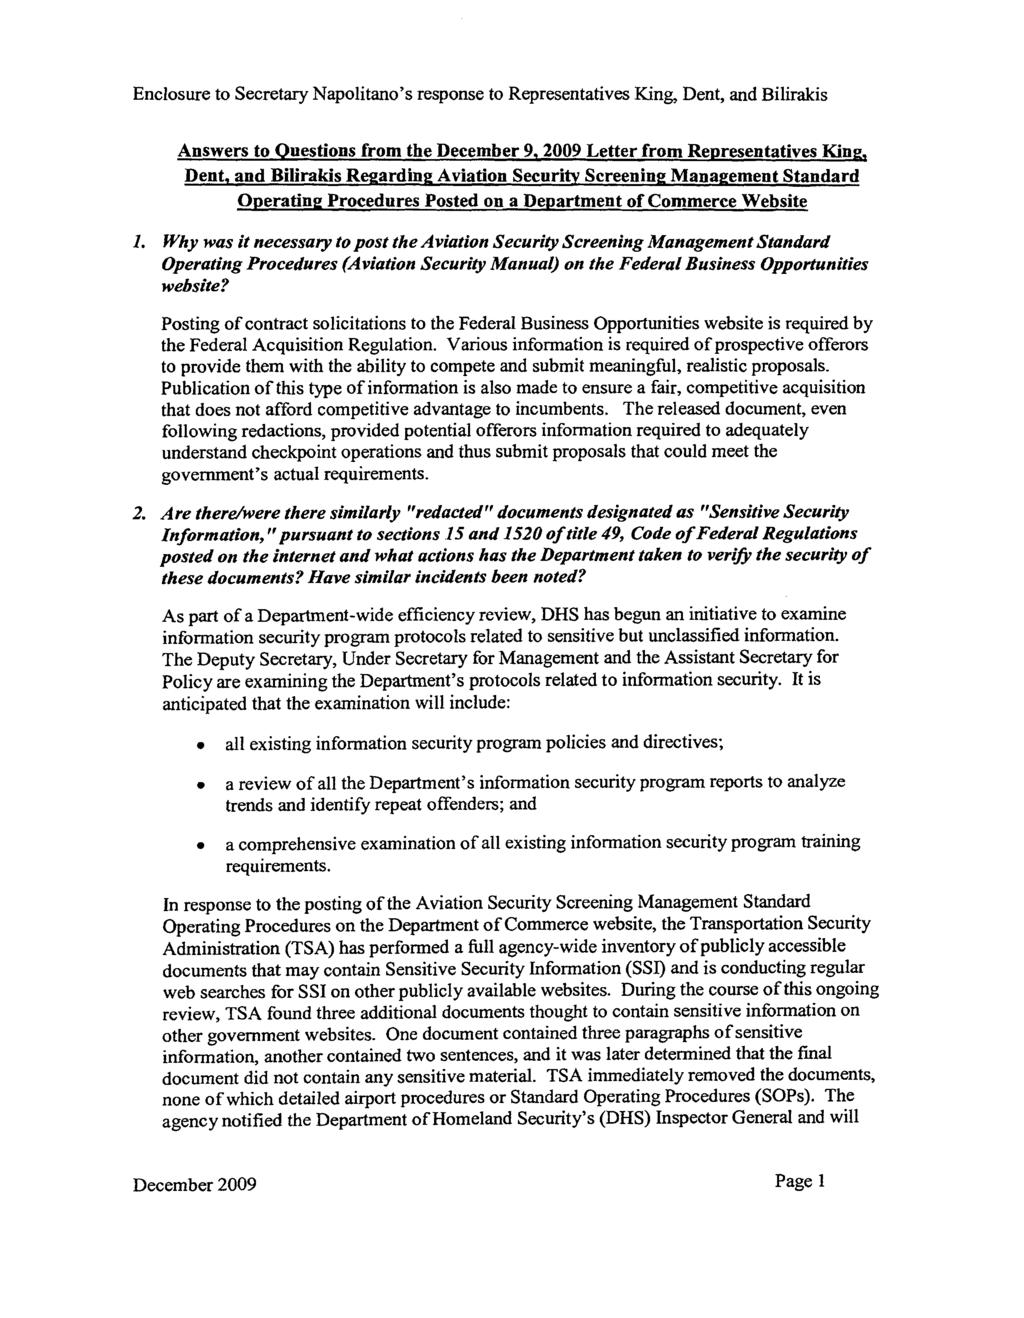 Answers to Questions from the December 9, 2009 Letter from Representatives King, Dent, and Bilirakis Regarding Aviation Security Screening Management Standard Operatinl!